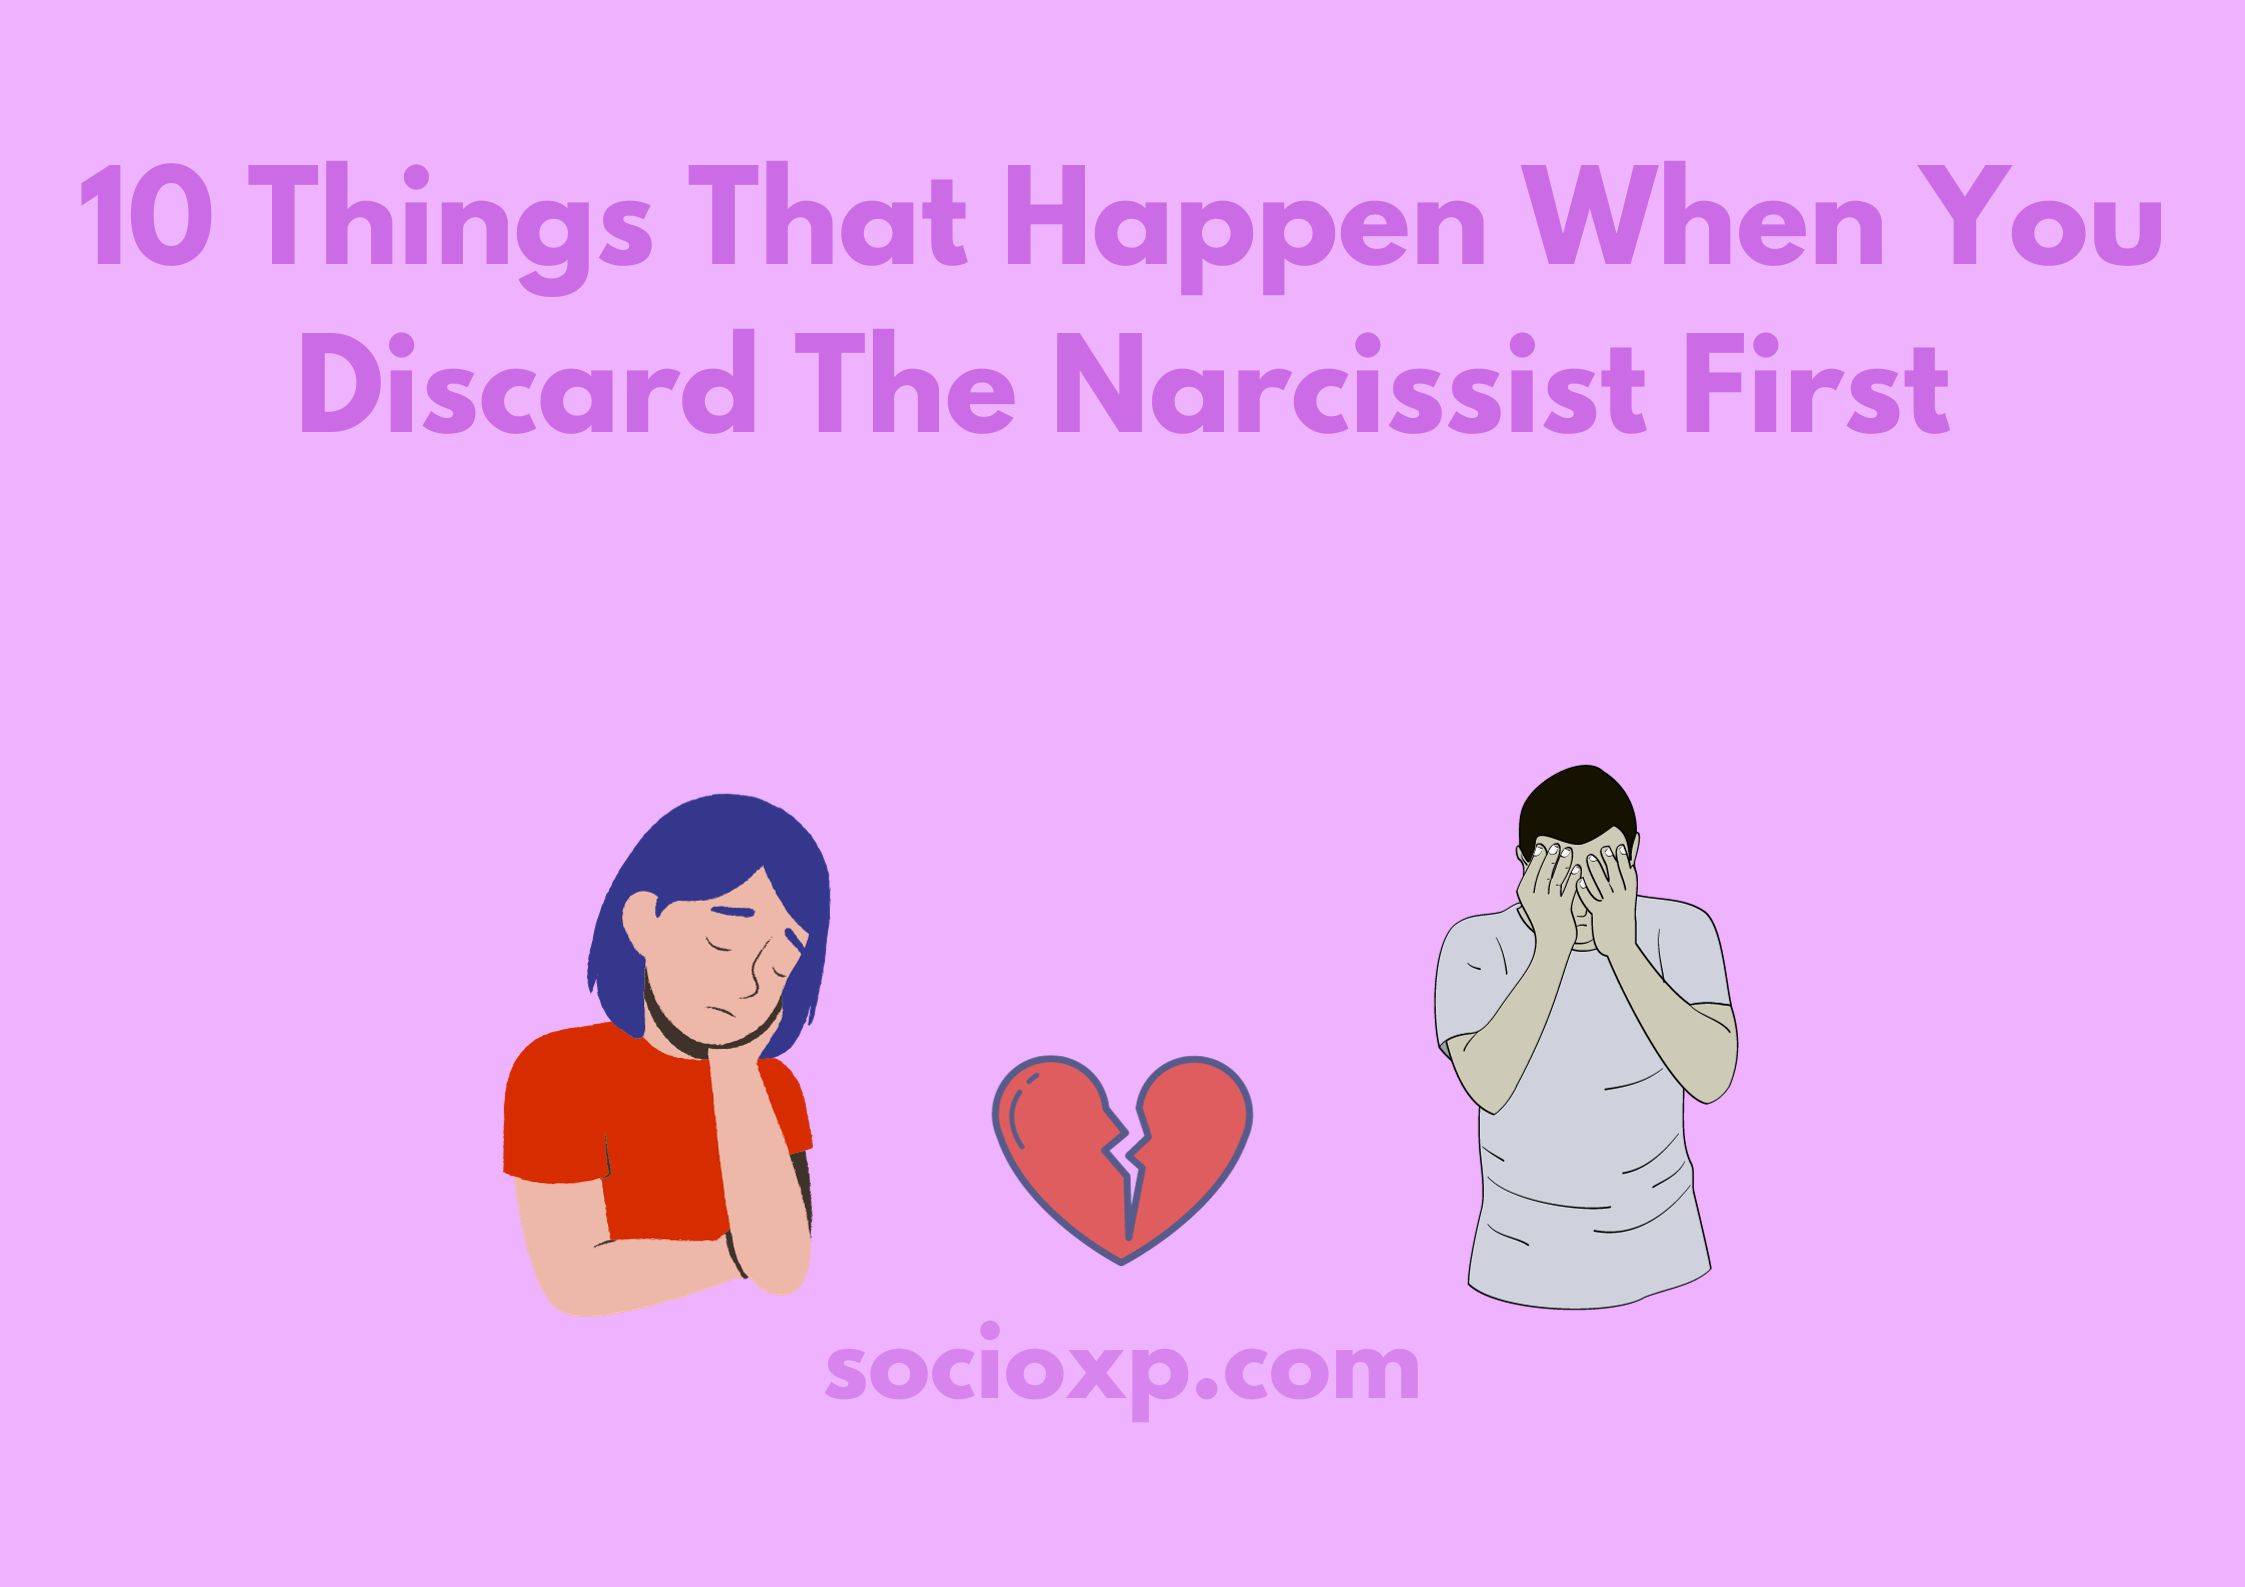 10 Things That Happen When You Discard The Narcissist First